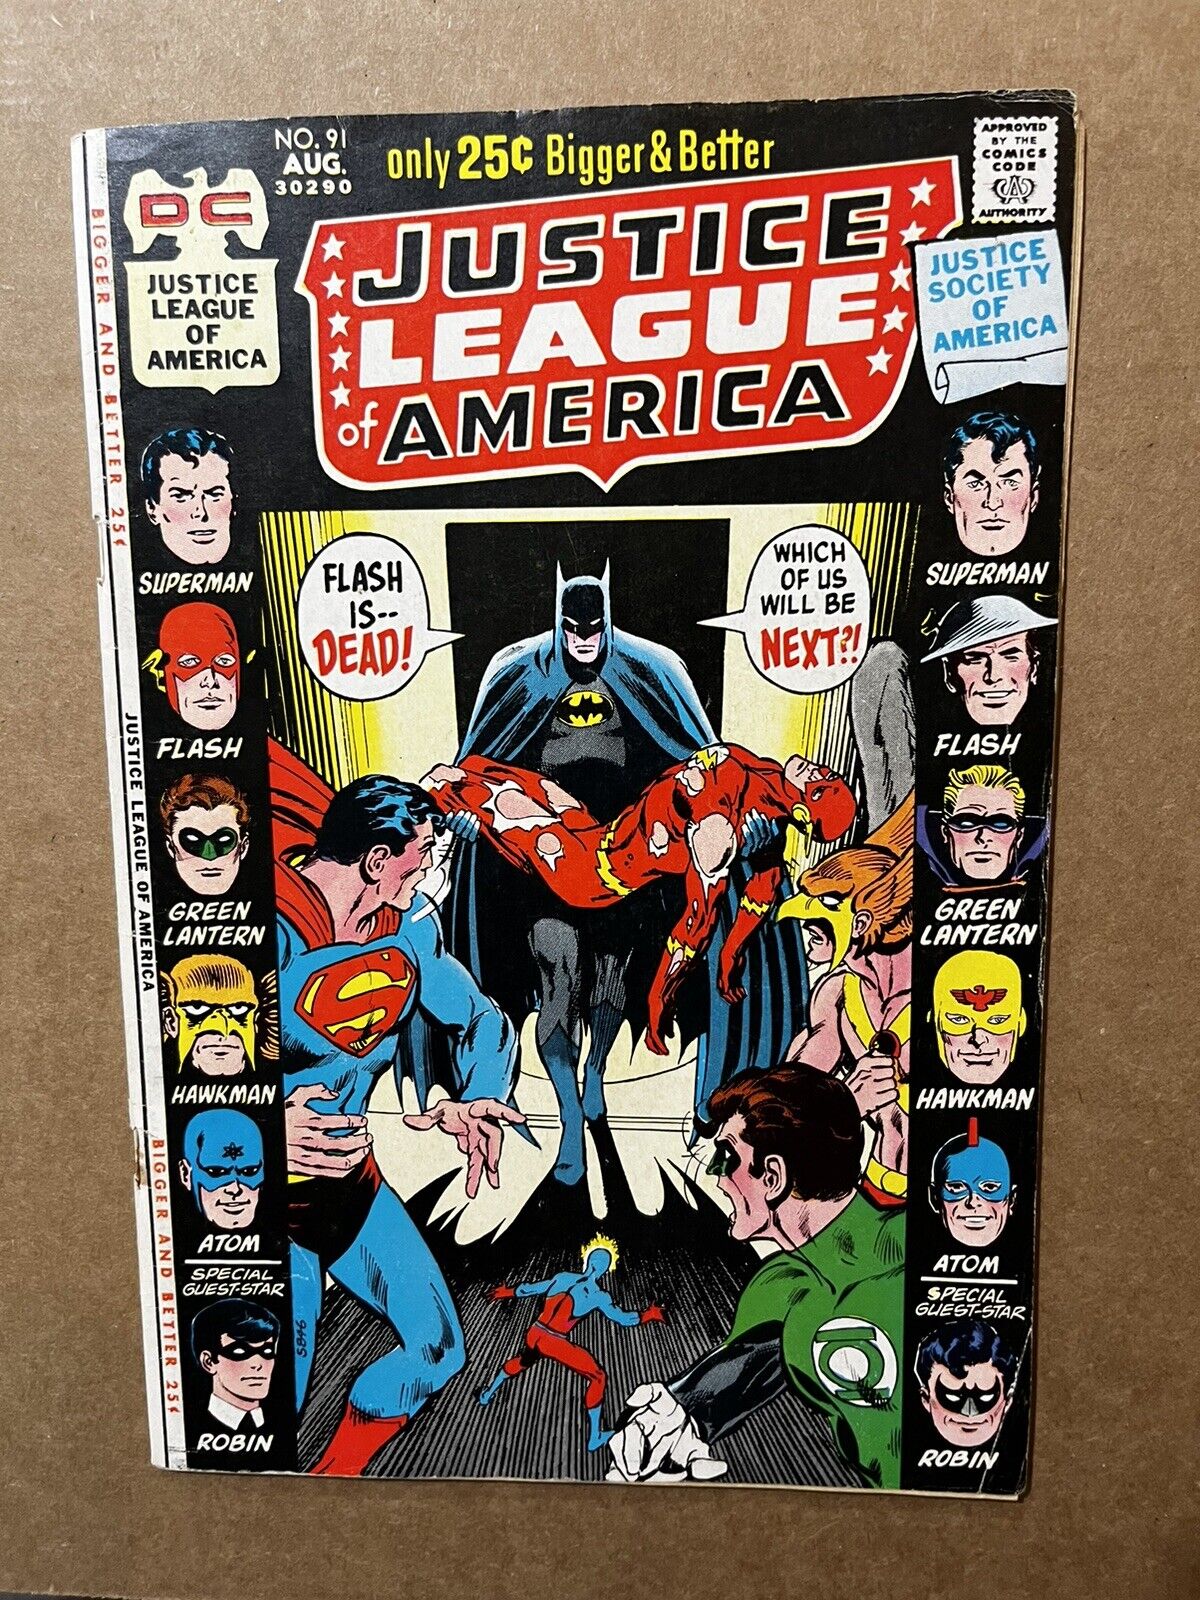 JUSTICE LEAGUE OF AMERICA #91 1971 25¢ Giant Neal Adams cover Nice